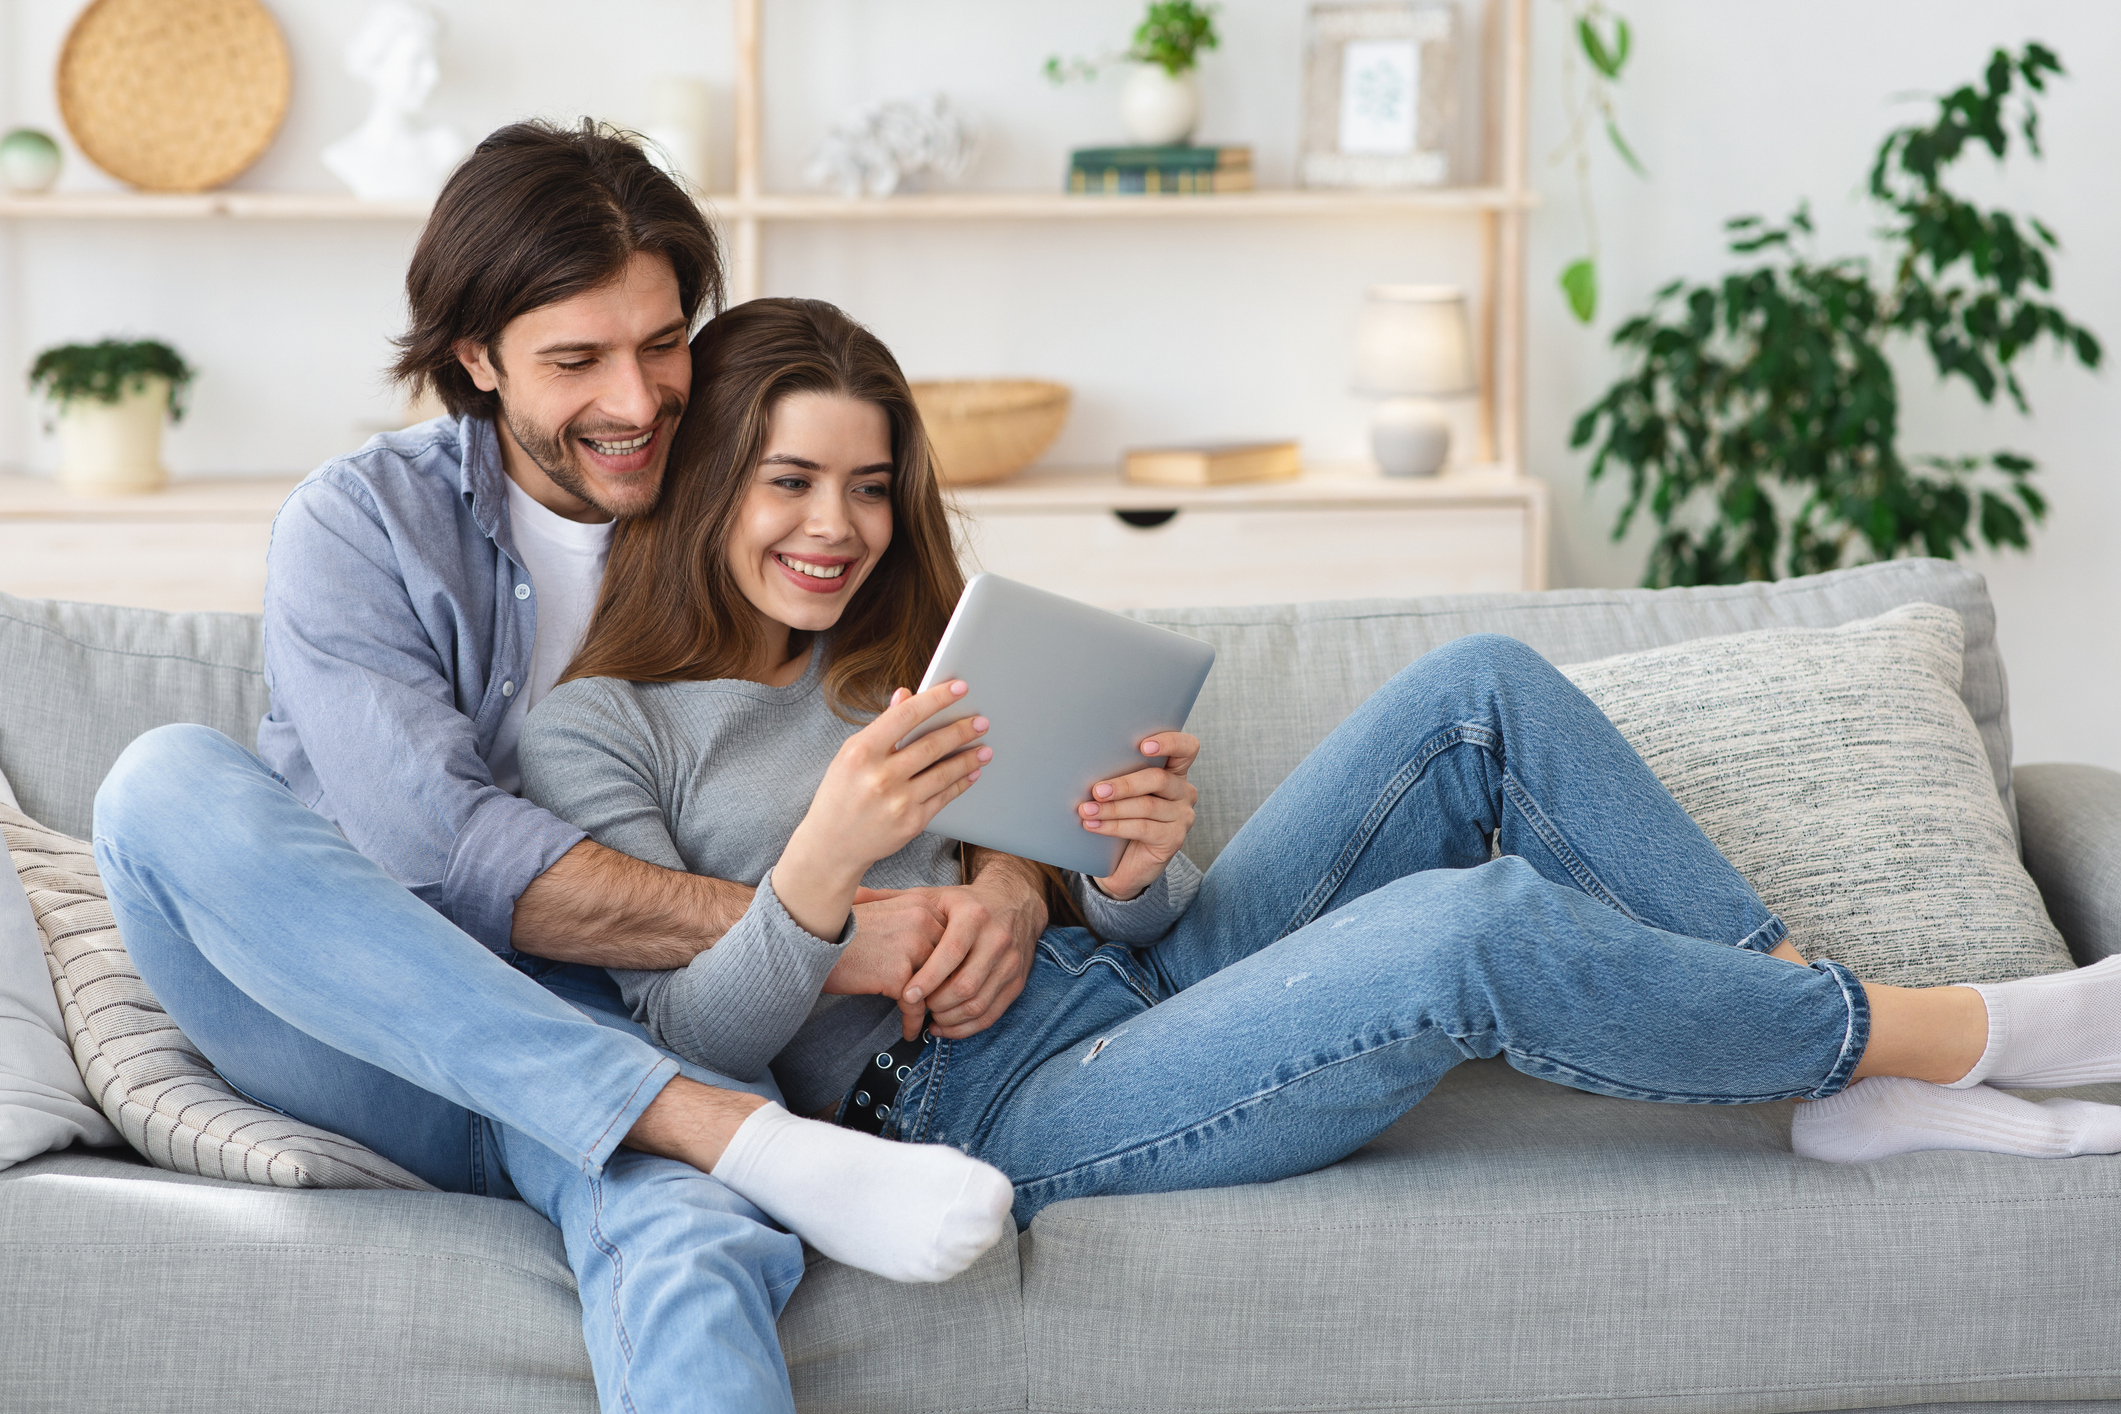 Cheerful couple cuddling on sofa at home, using digital tablet